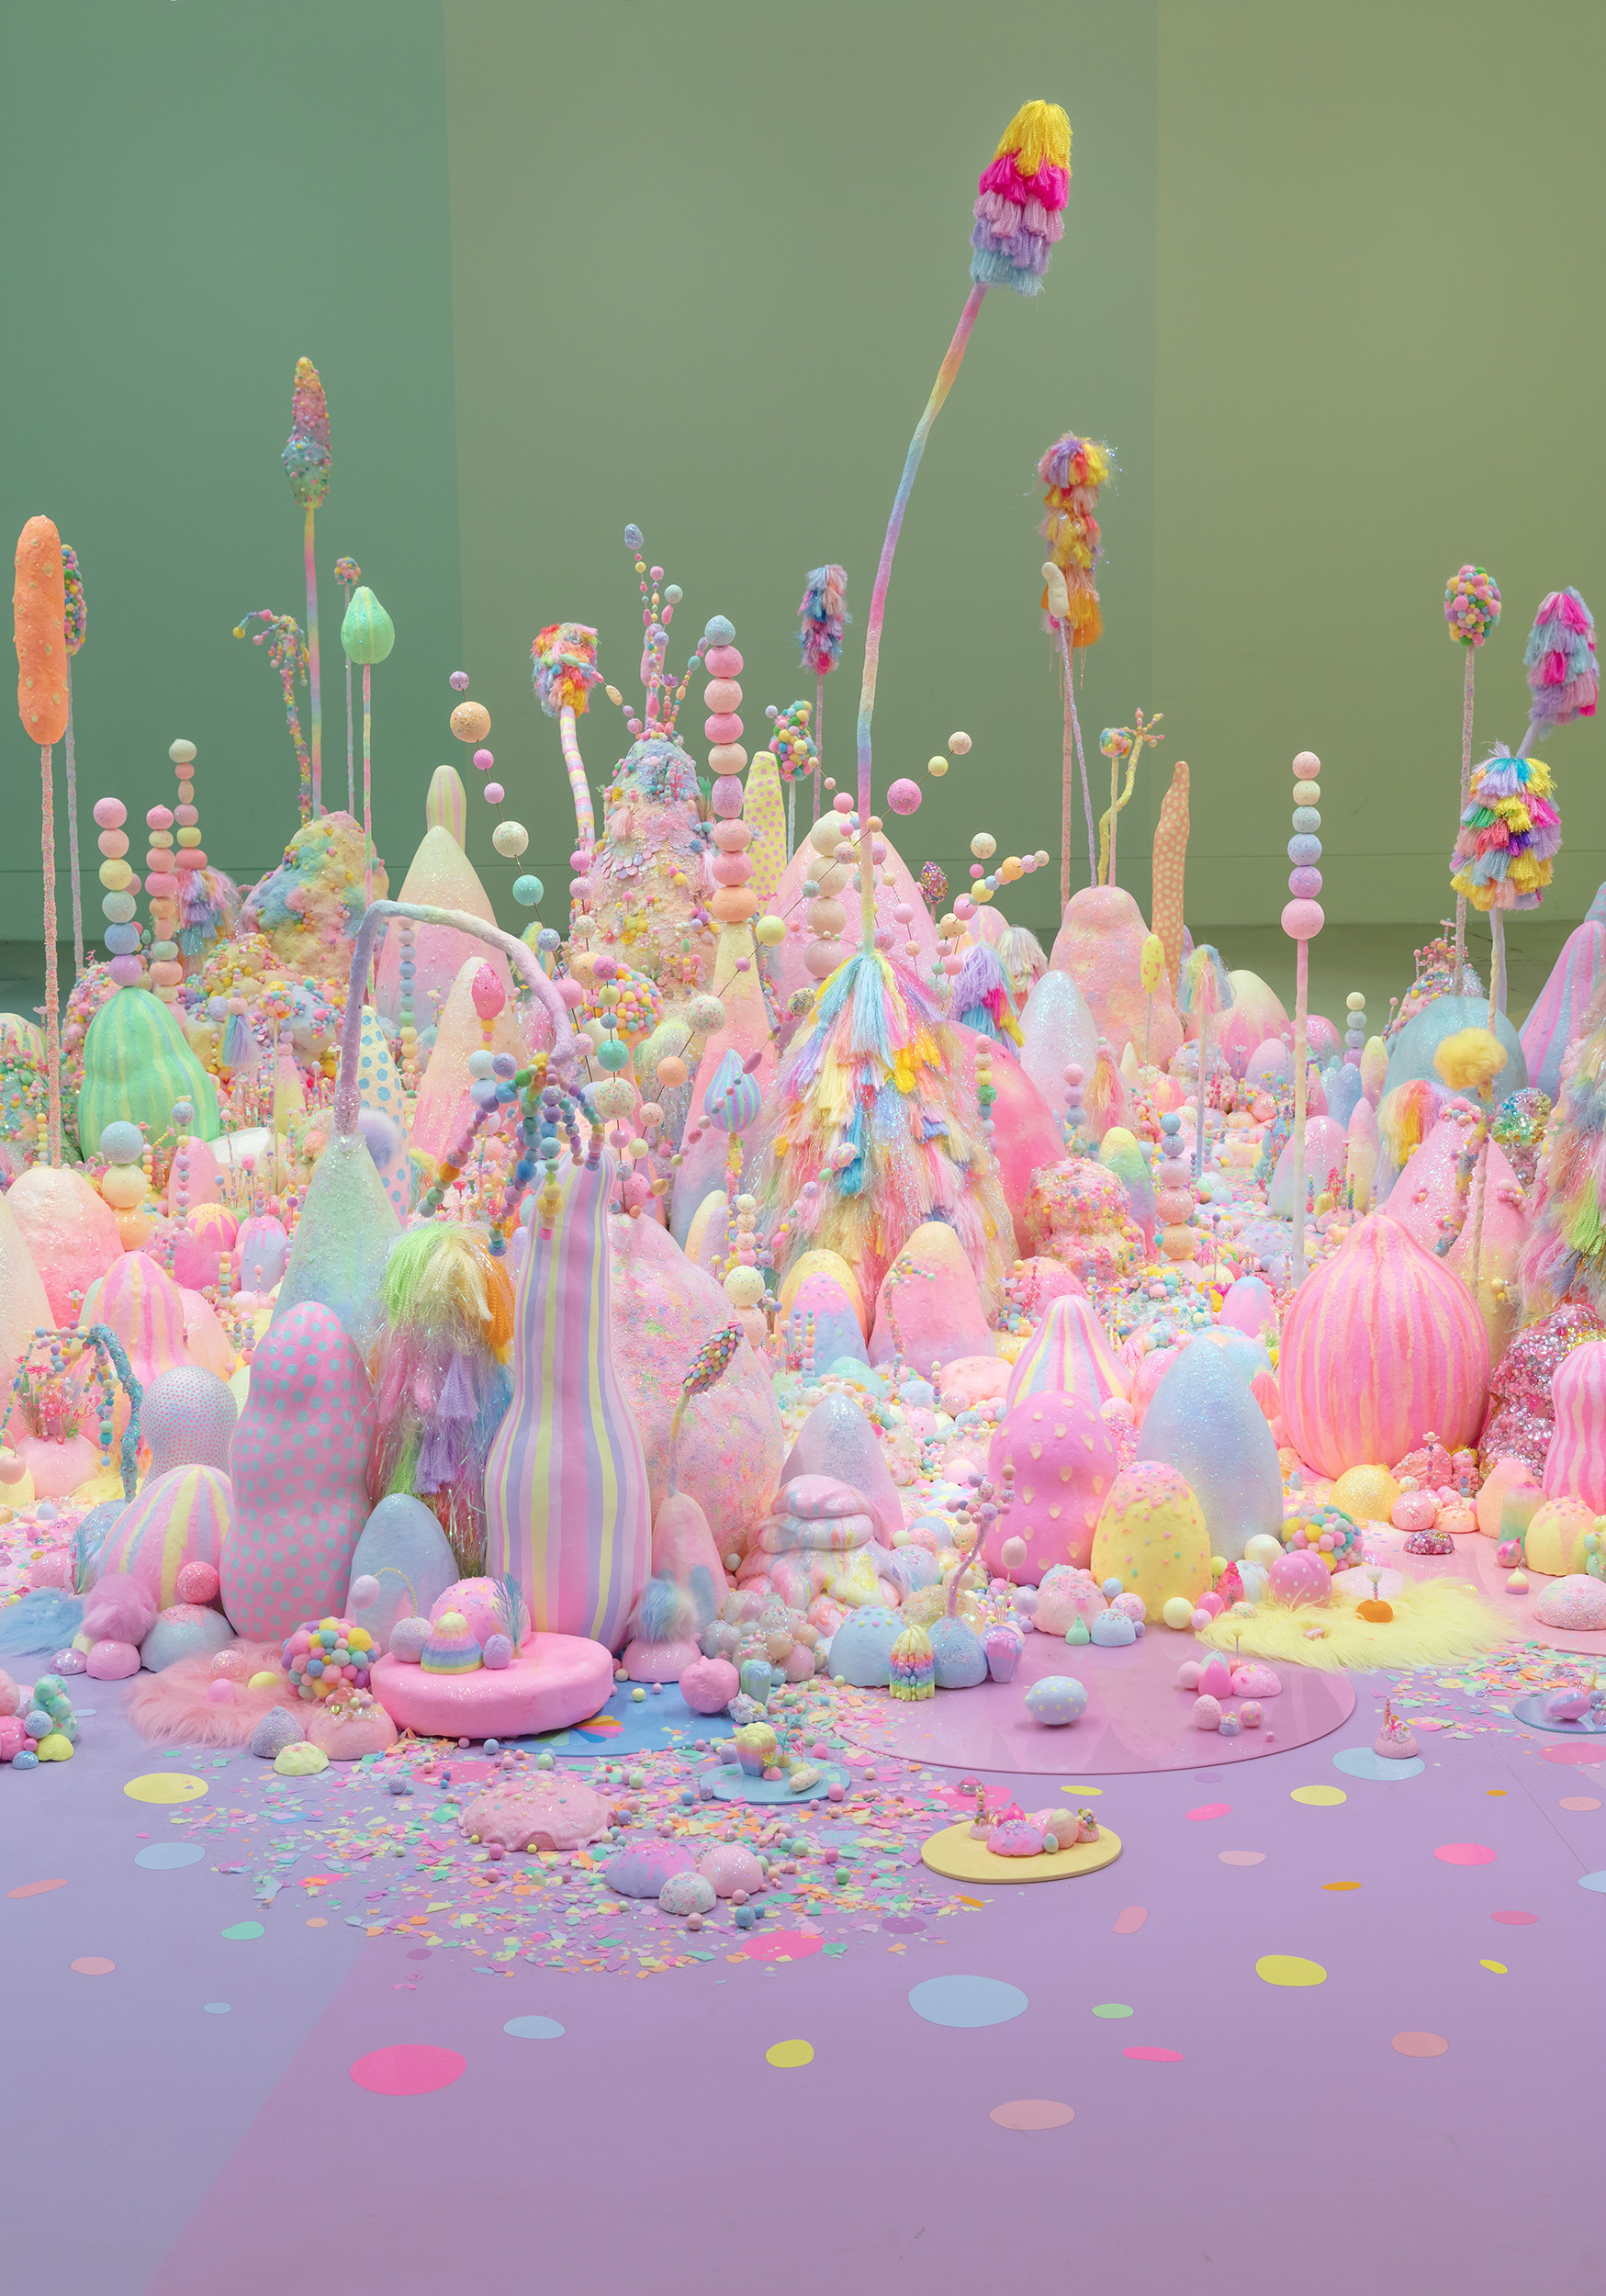 An installation of pastel-colored candies